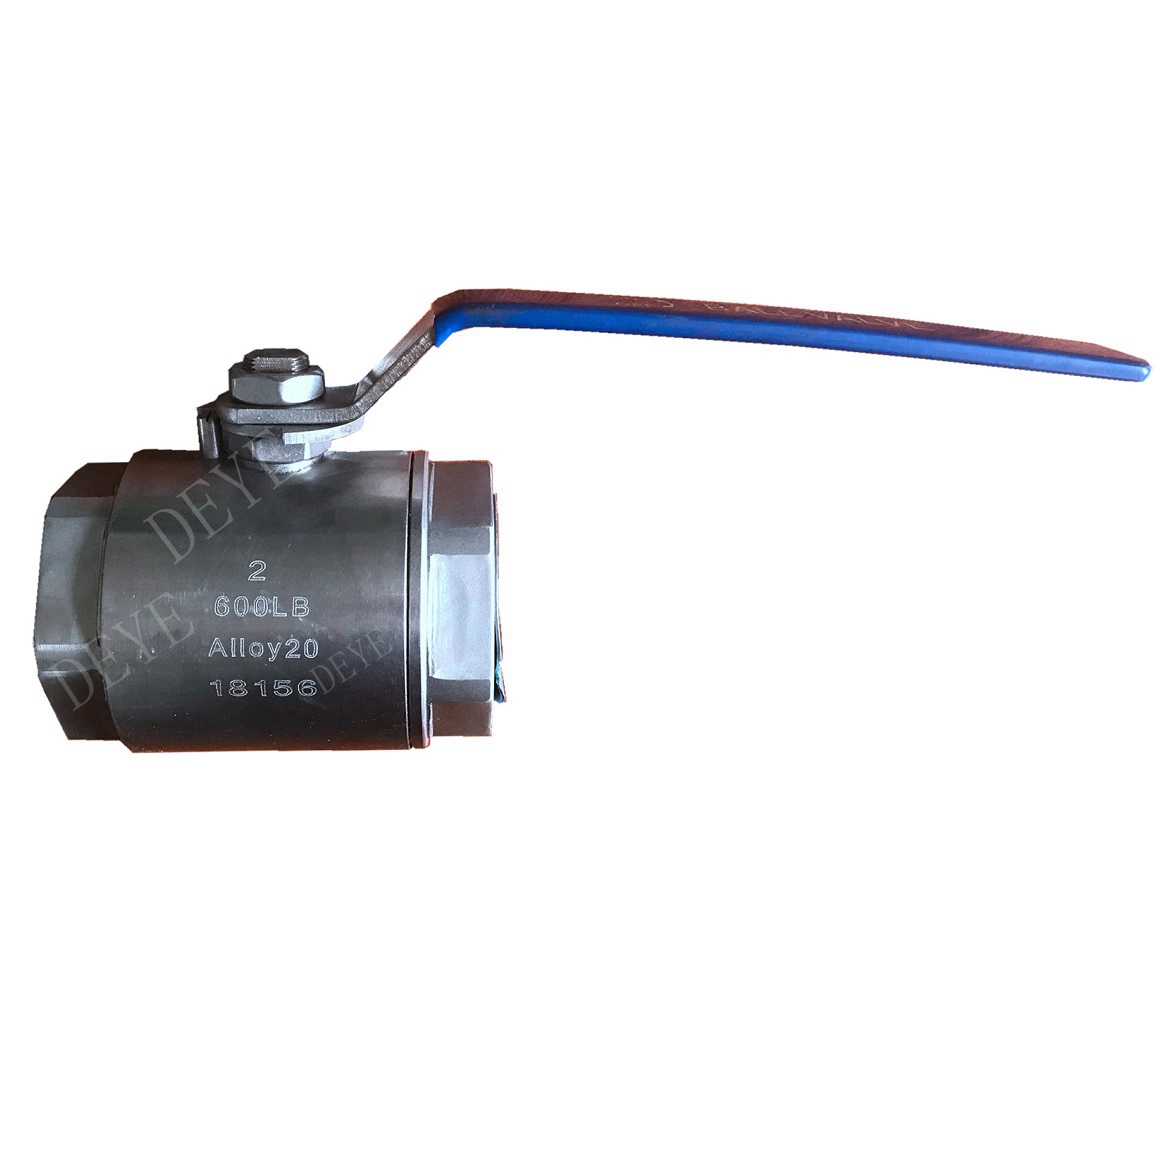 Alloy20 steel ball valve with 2pc body